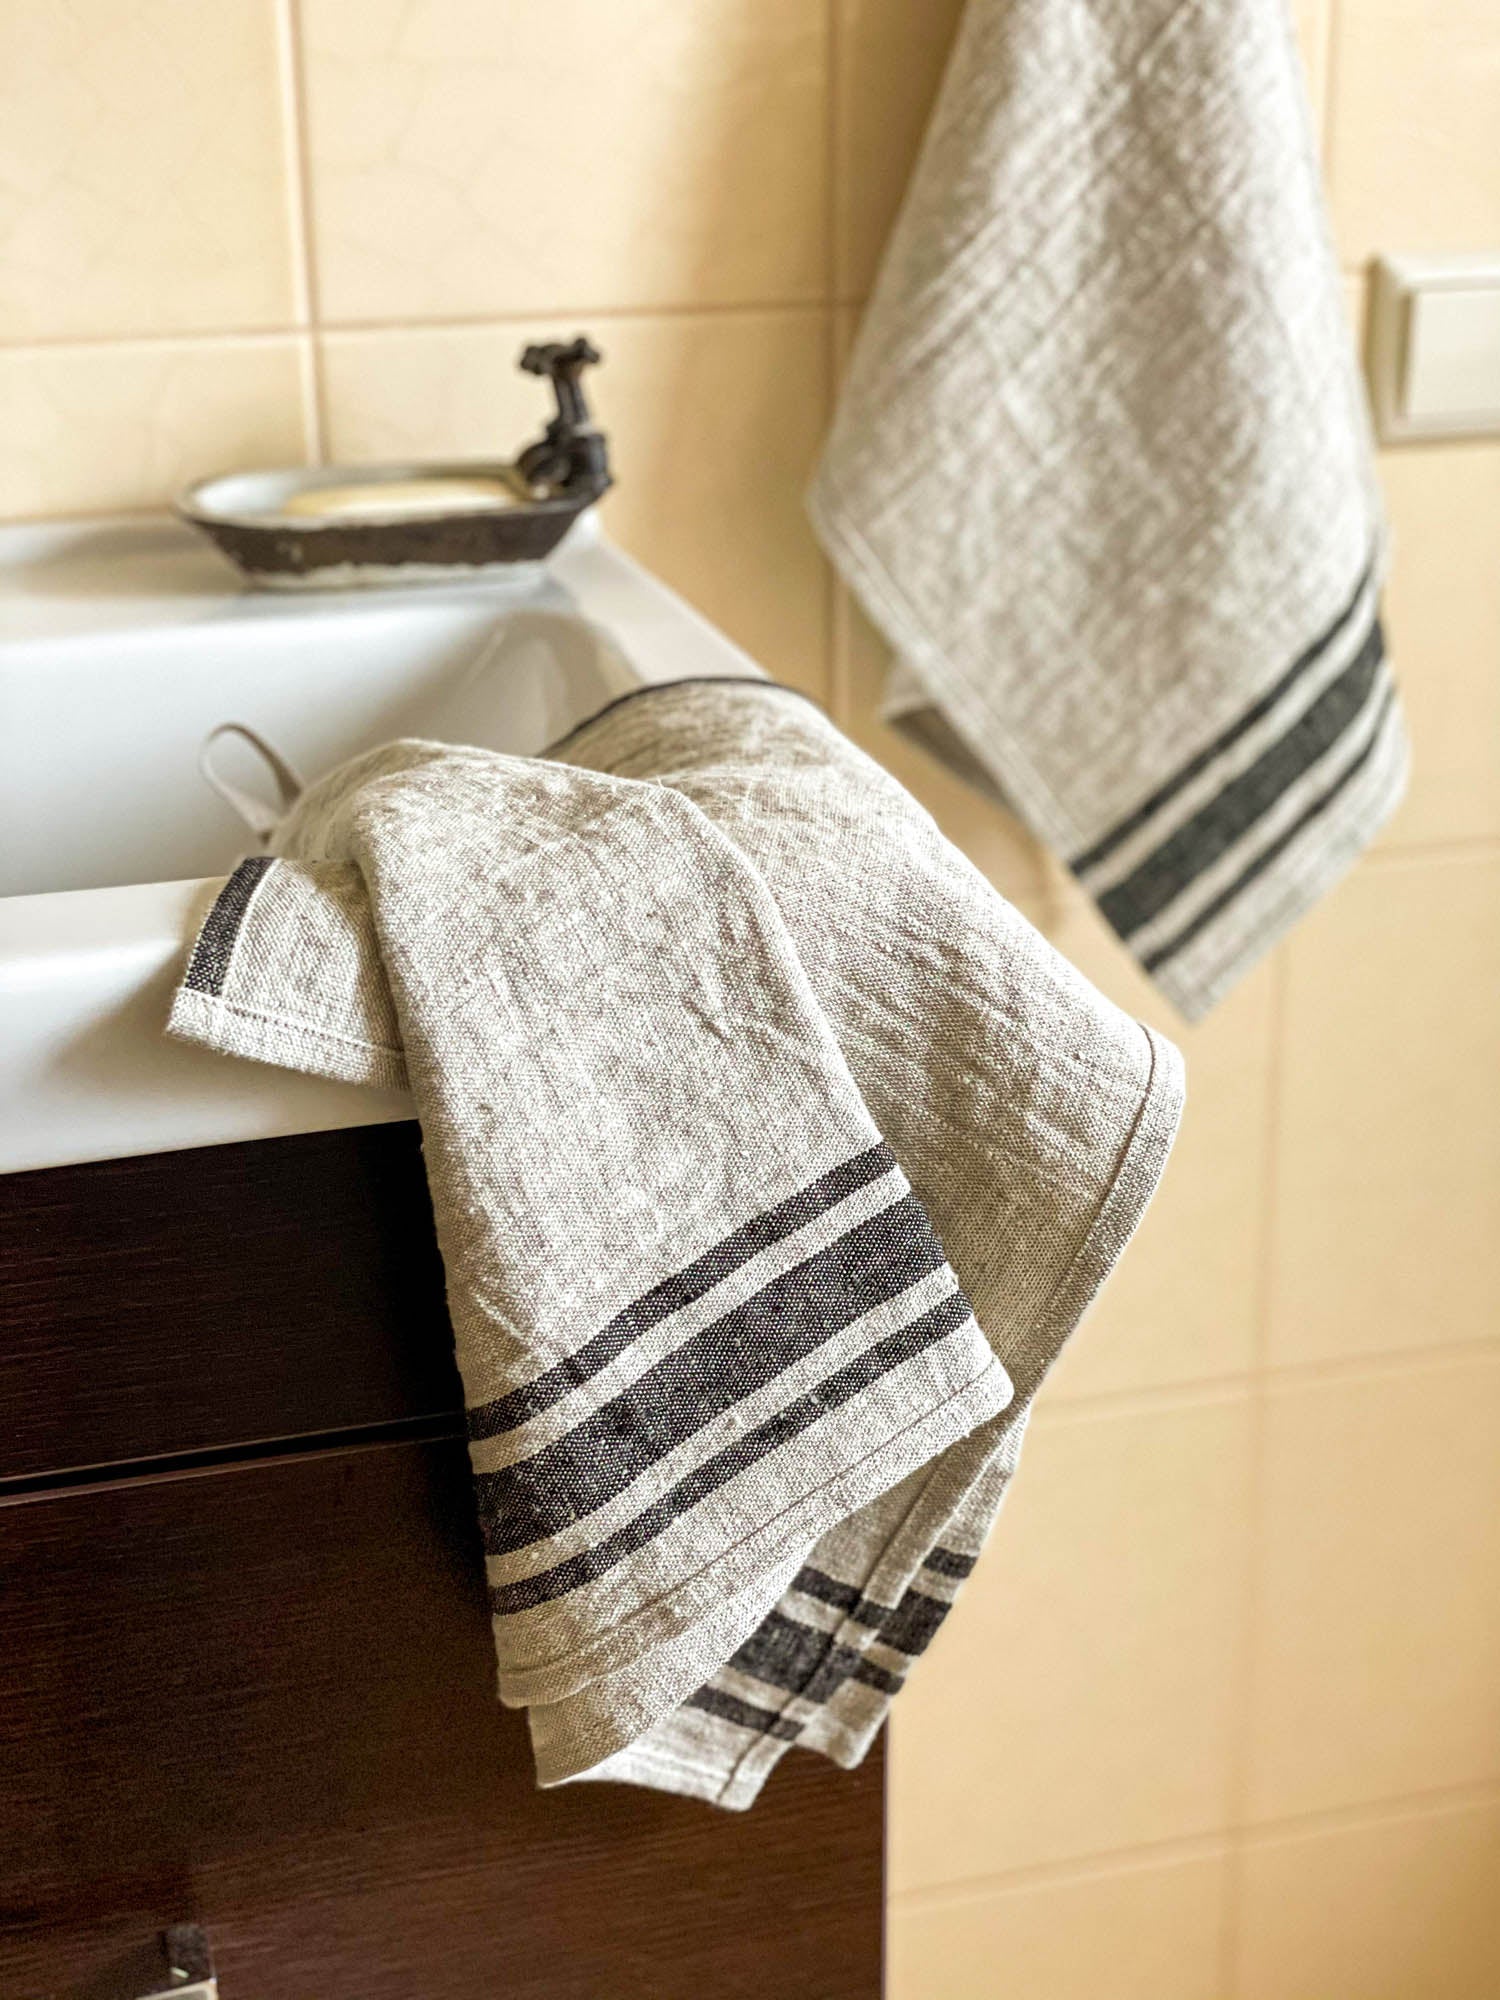 French style linen bath towels with black stripes